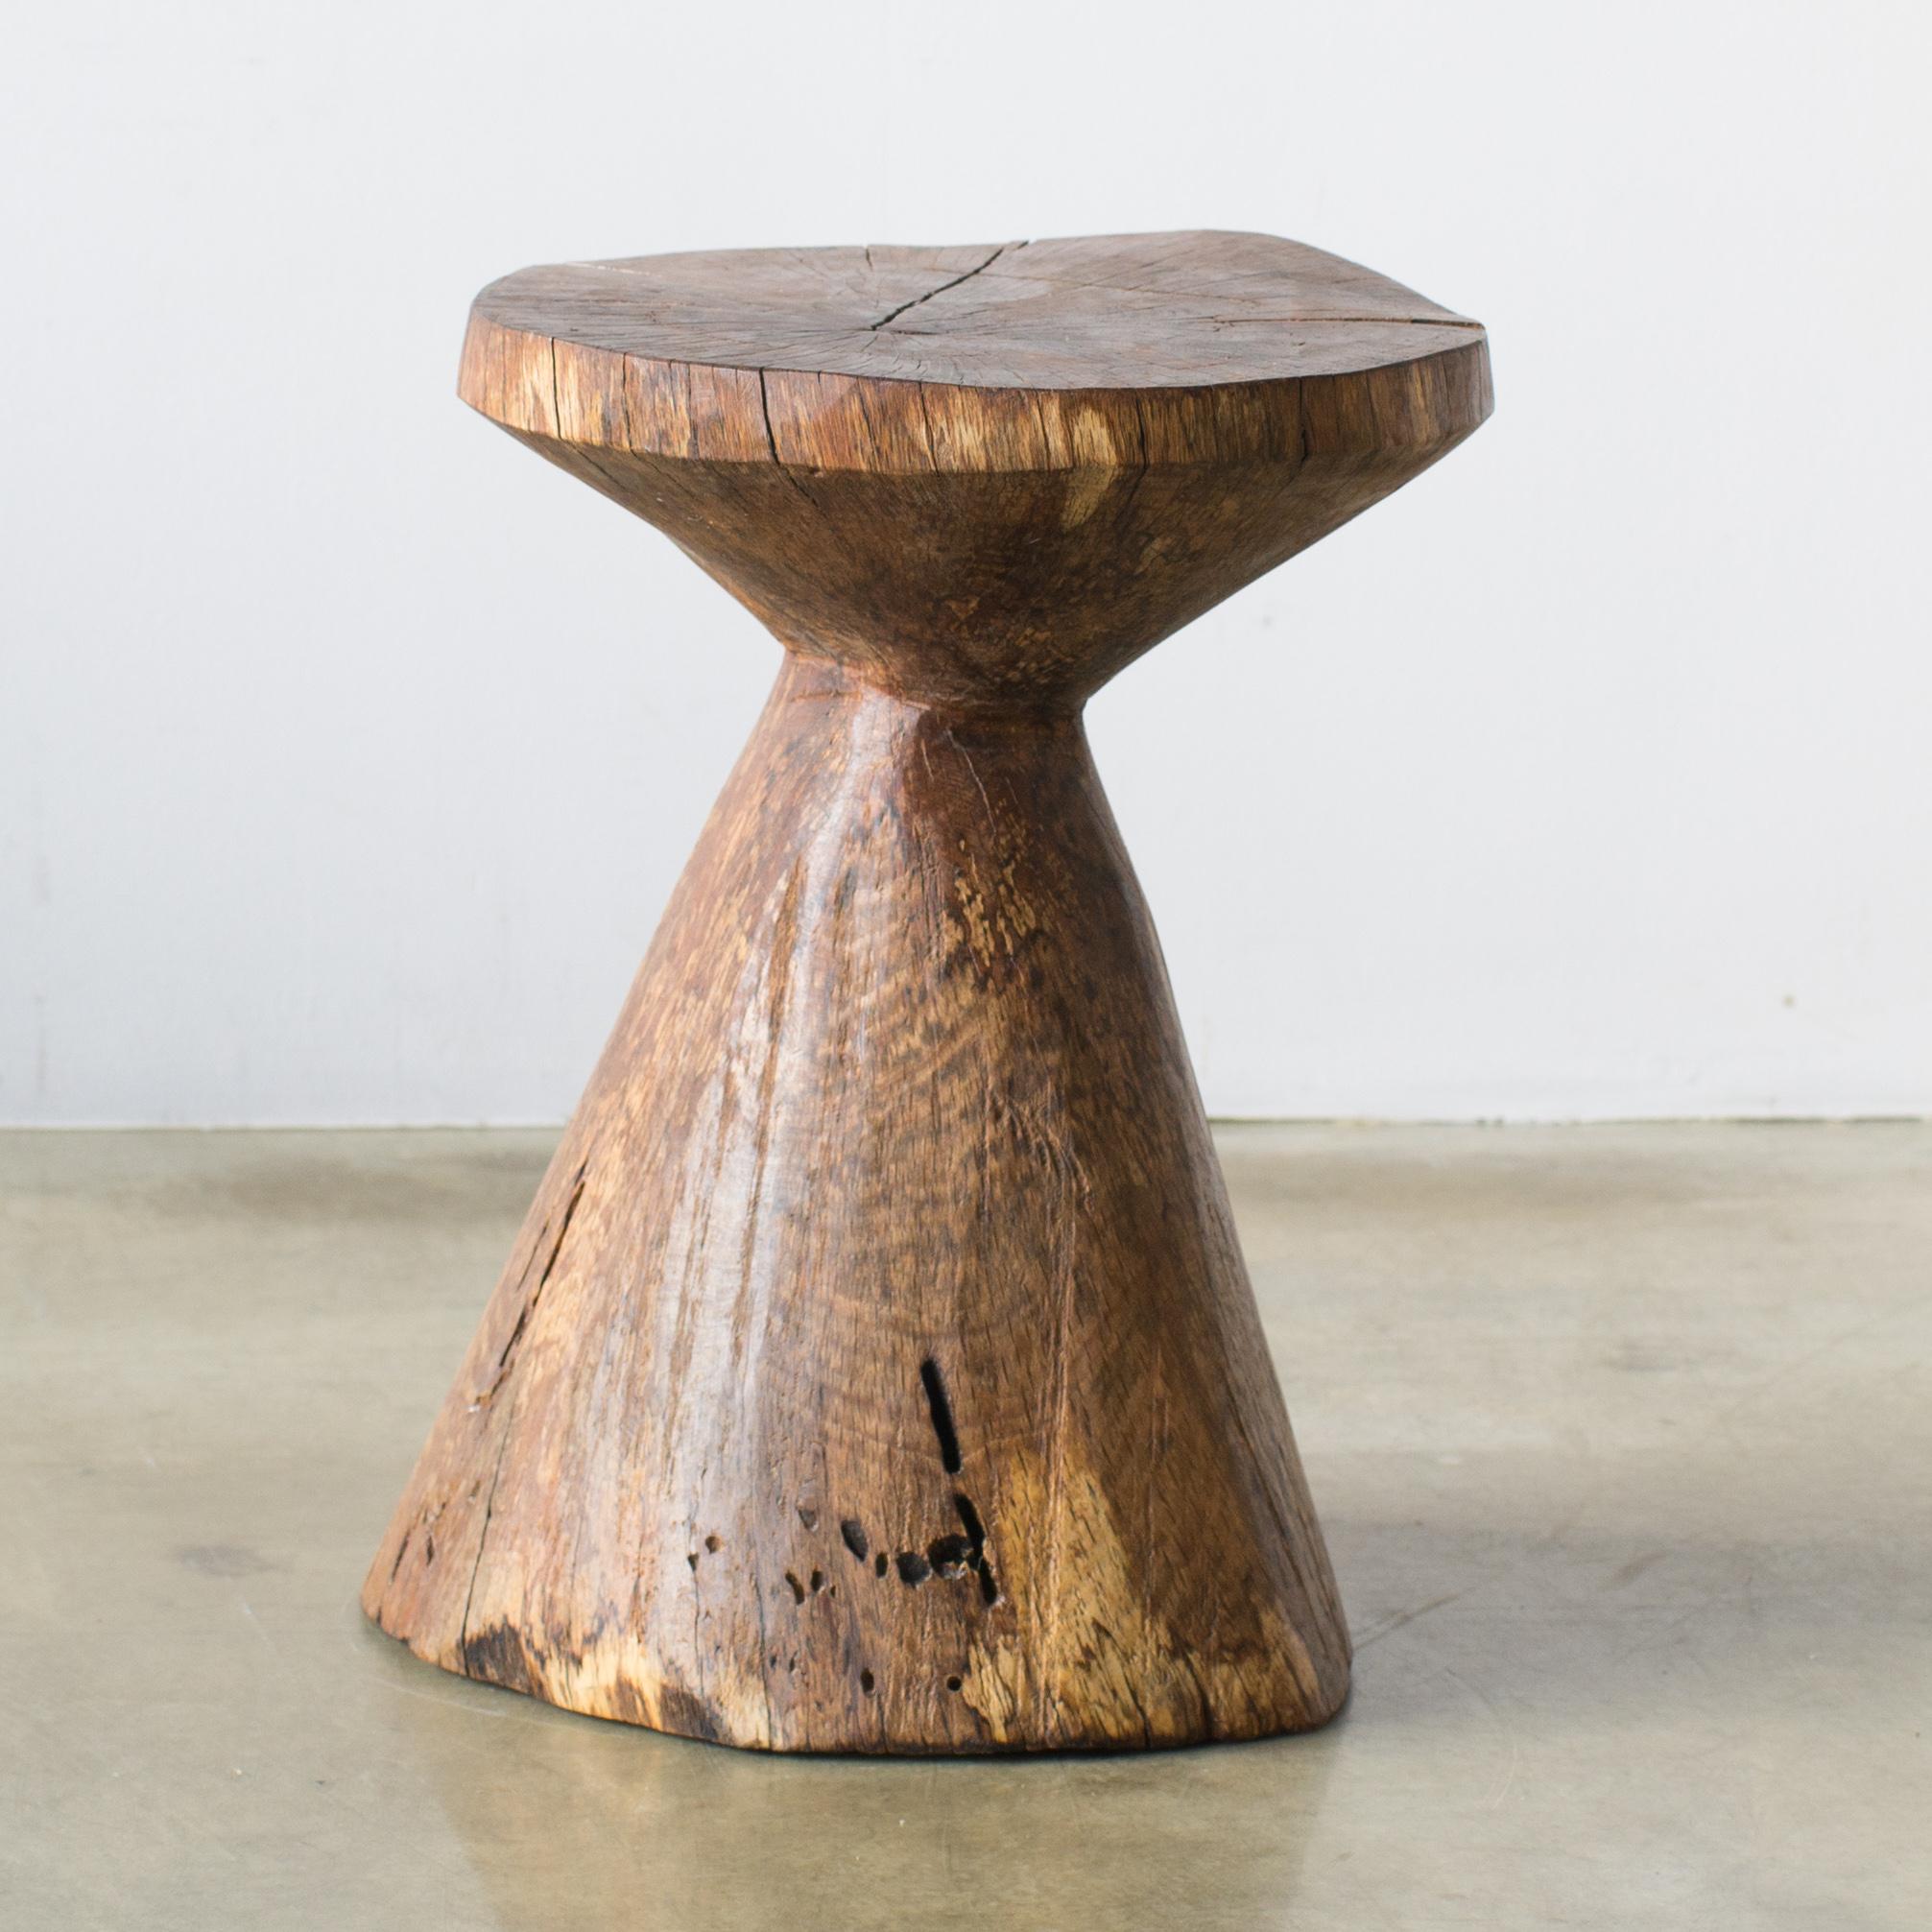 Name: Foot of mountain
Sculptural stool by Hiroyuki Nishimura and zone carved furniture
Material: Quercus.
This work is carved from log with some kinds of chainsaws.
Most of wood used for Nishimura's works are unable to use anything, these woods